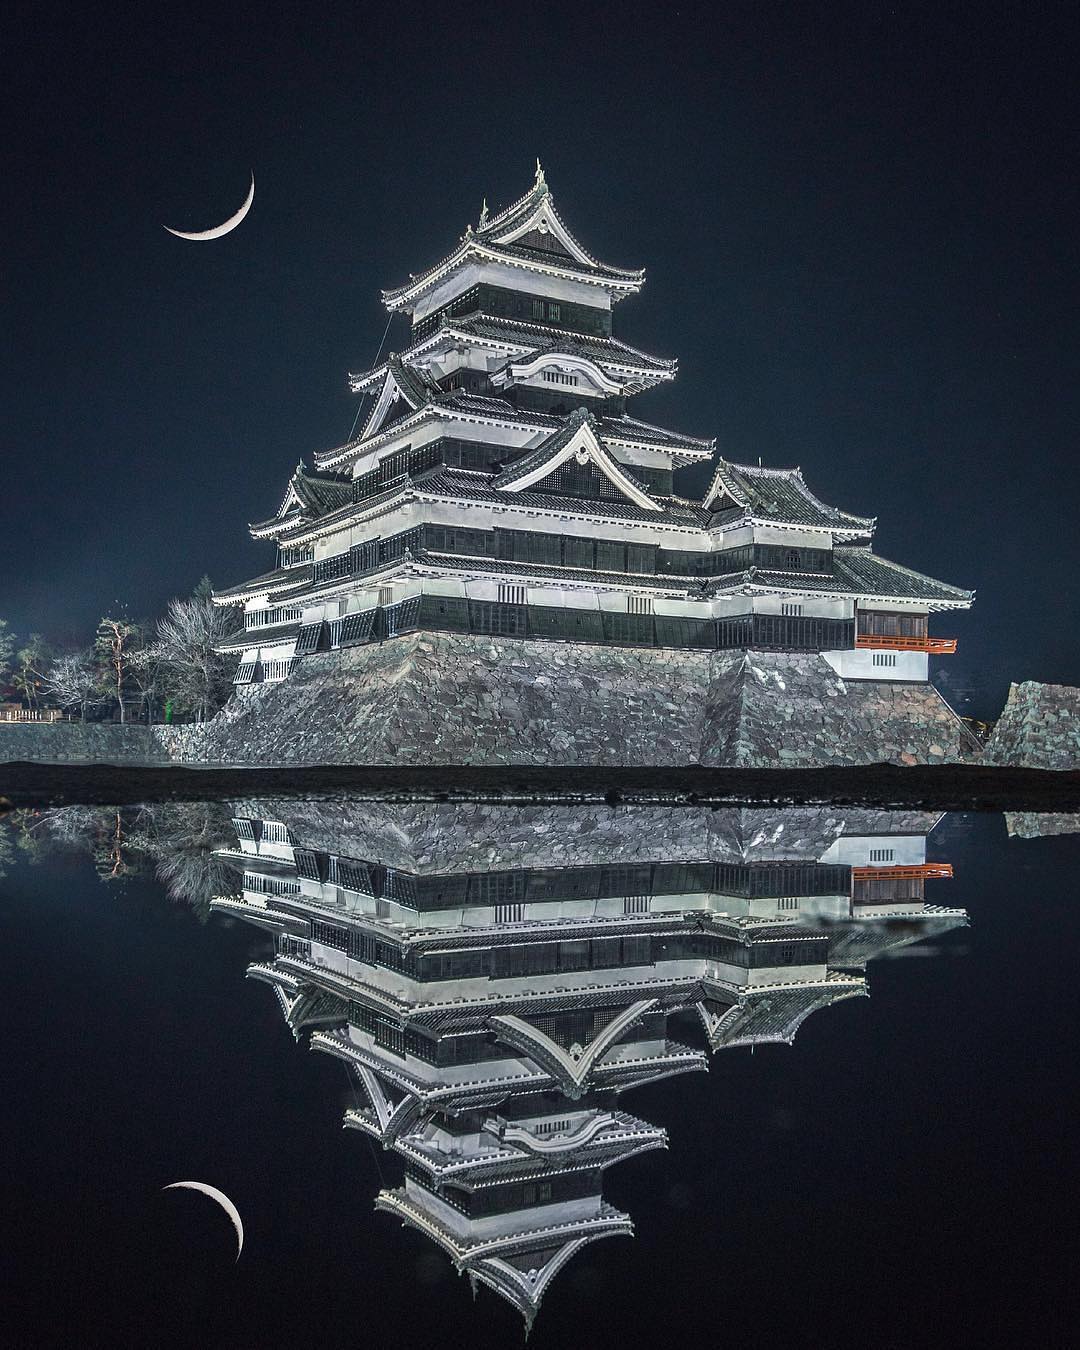 Matsumoto Castle looking like an evil fortress reflecting off the water